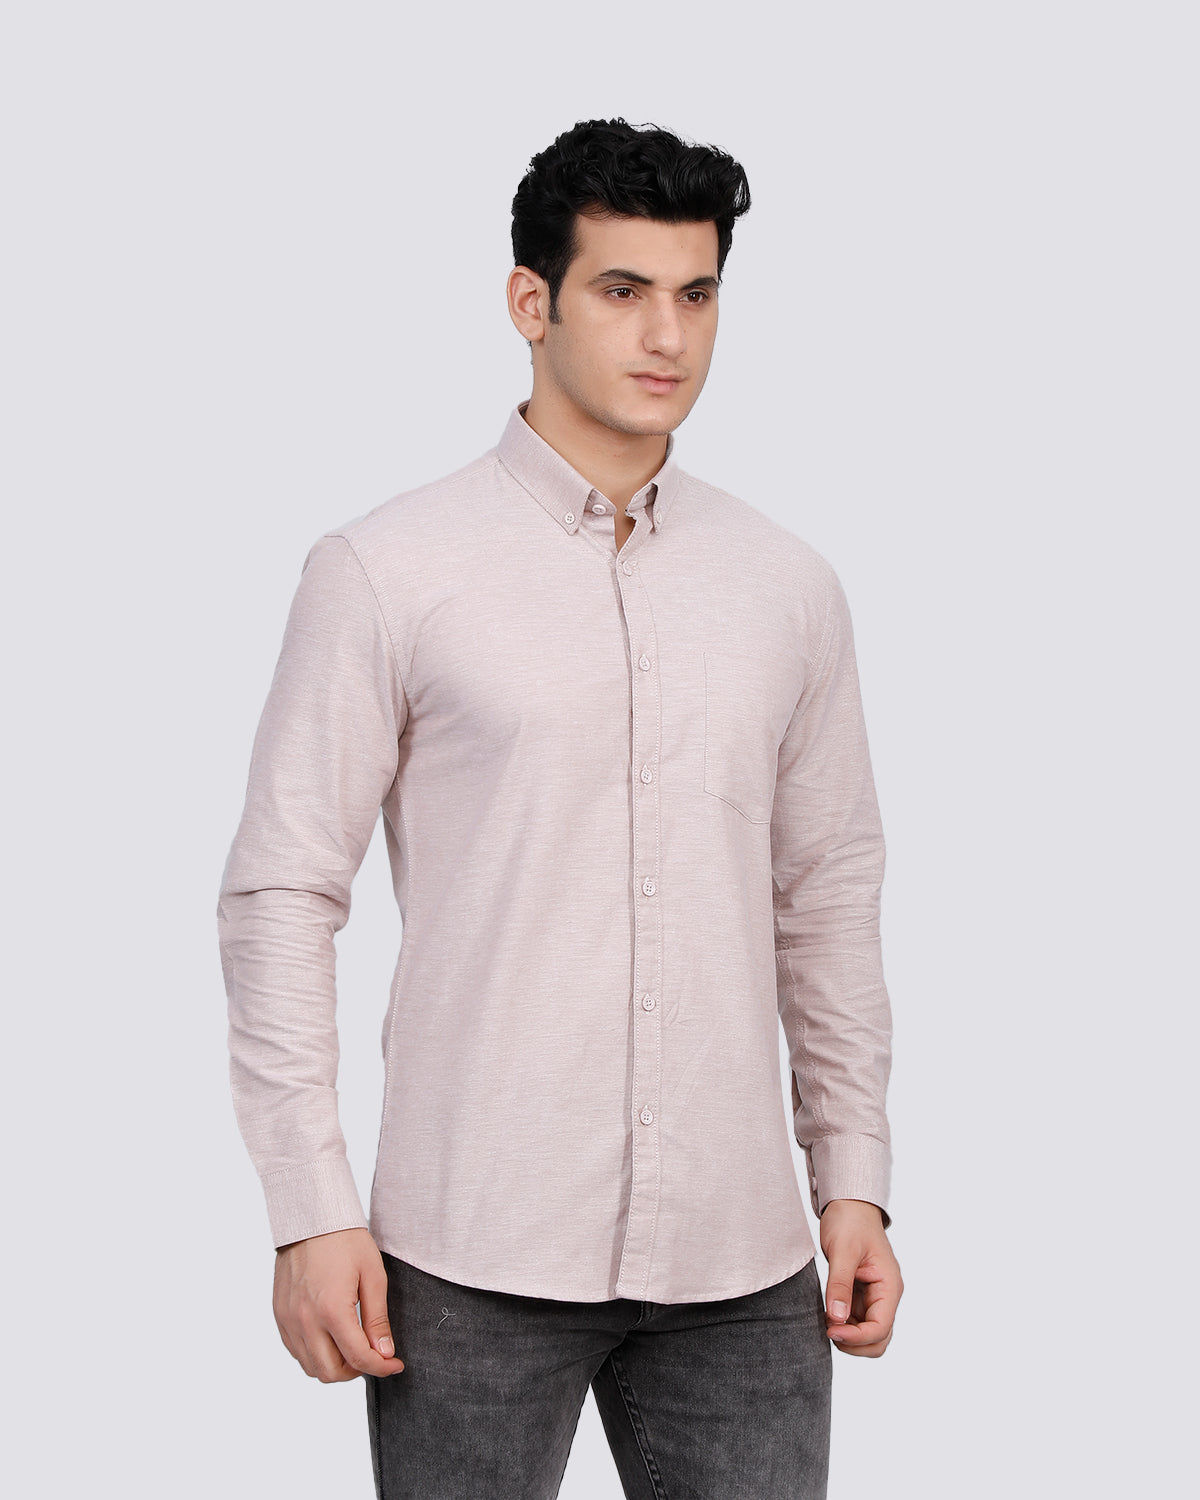 Textured Slim Fit Shirt with Patch Pocket - Beige